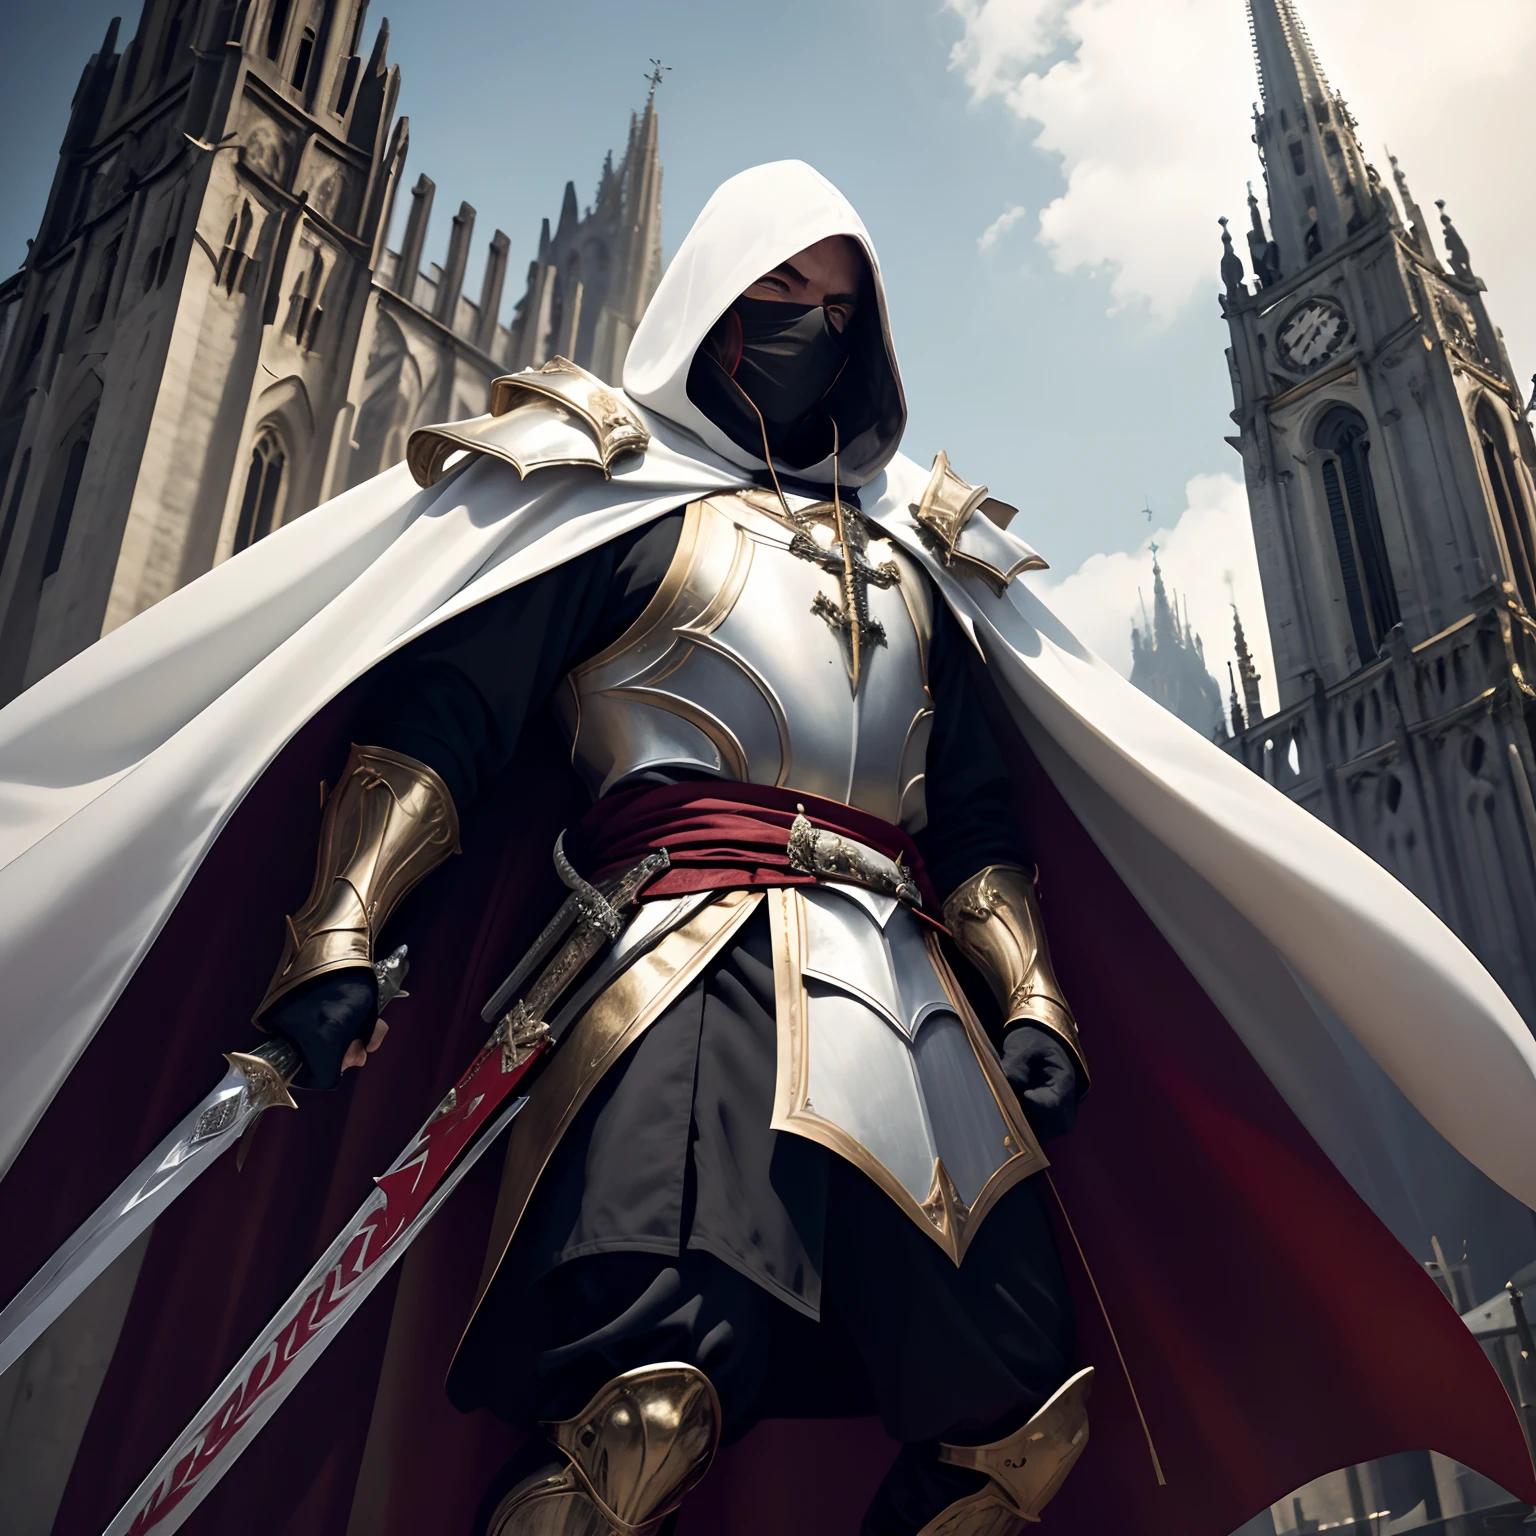 full body زاوية منخفضة shot of an intimidating male ملثمين holy warrior with a white cloak with hood in gold red and white clothes wielding a two-handed greatsword standing on top of a cathedral tower, رجل, معطف طويل, عيون سوداء, زاوية منخفضة, مفصلة للغاية, ملثمين, قناع طقوسي